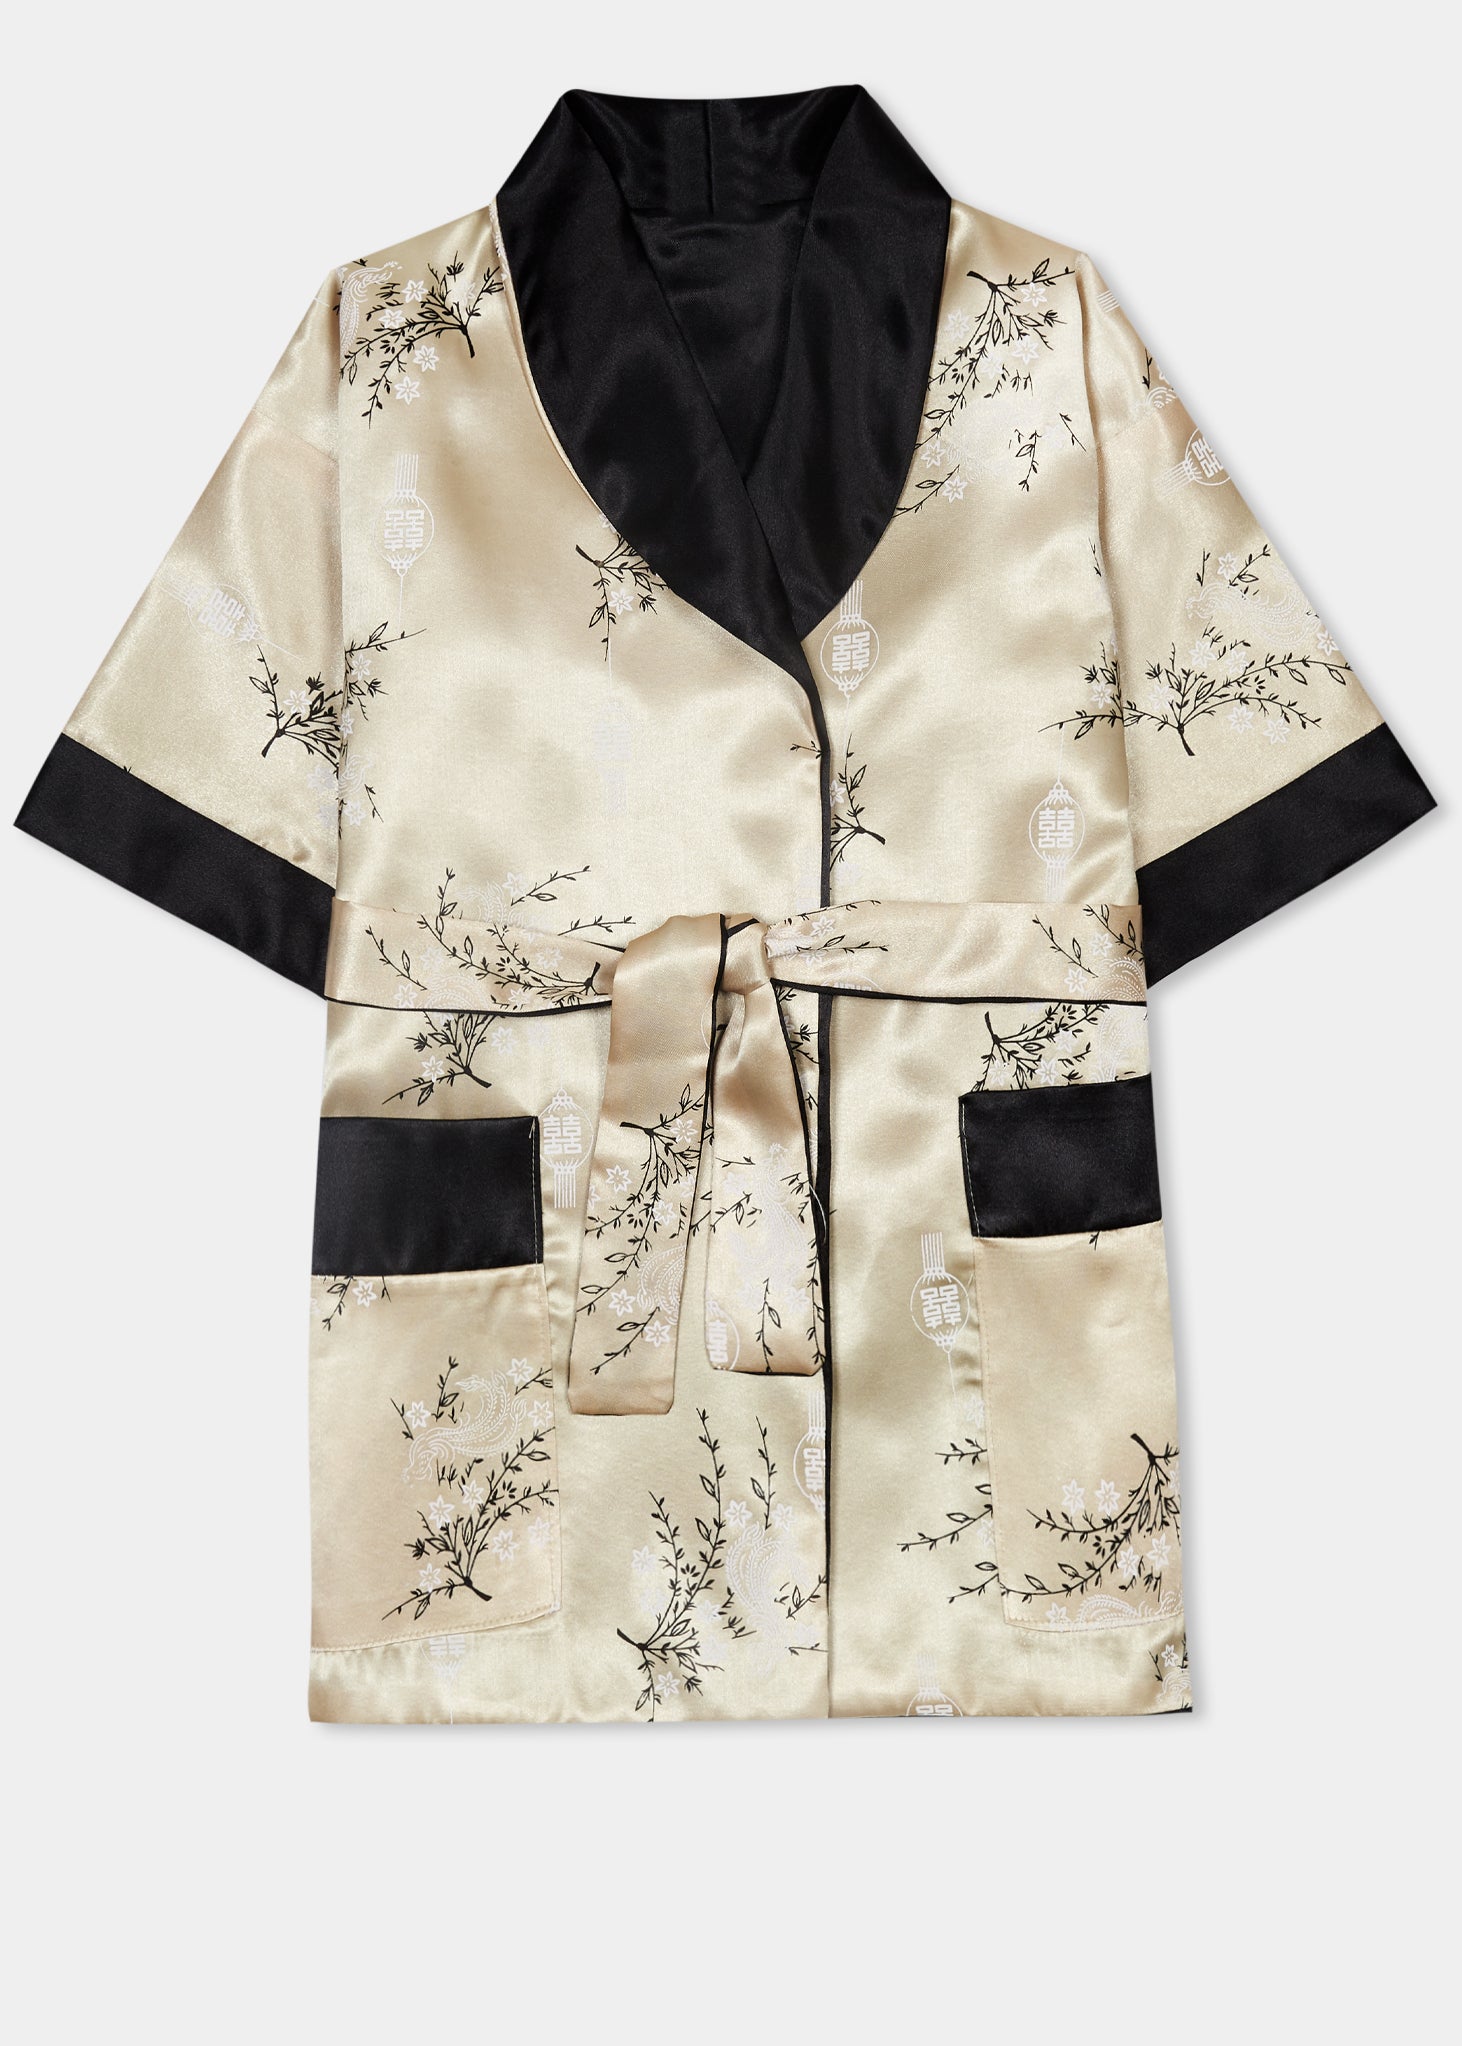 Traditionally styled fully reversible kimono with shawl collar, patch pockets and tie belt. Manufactured in a classic gold silky rayon/polyester with a bird of paradise and Chinese lantern print - a symbol of joy and good fortune to one side. Solid black with large dragon embroidery to reverse side.